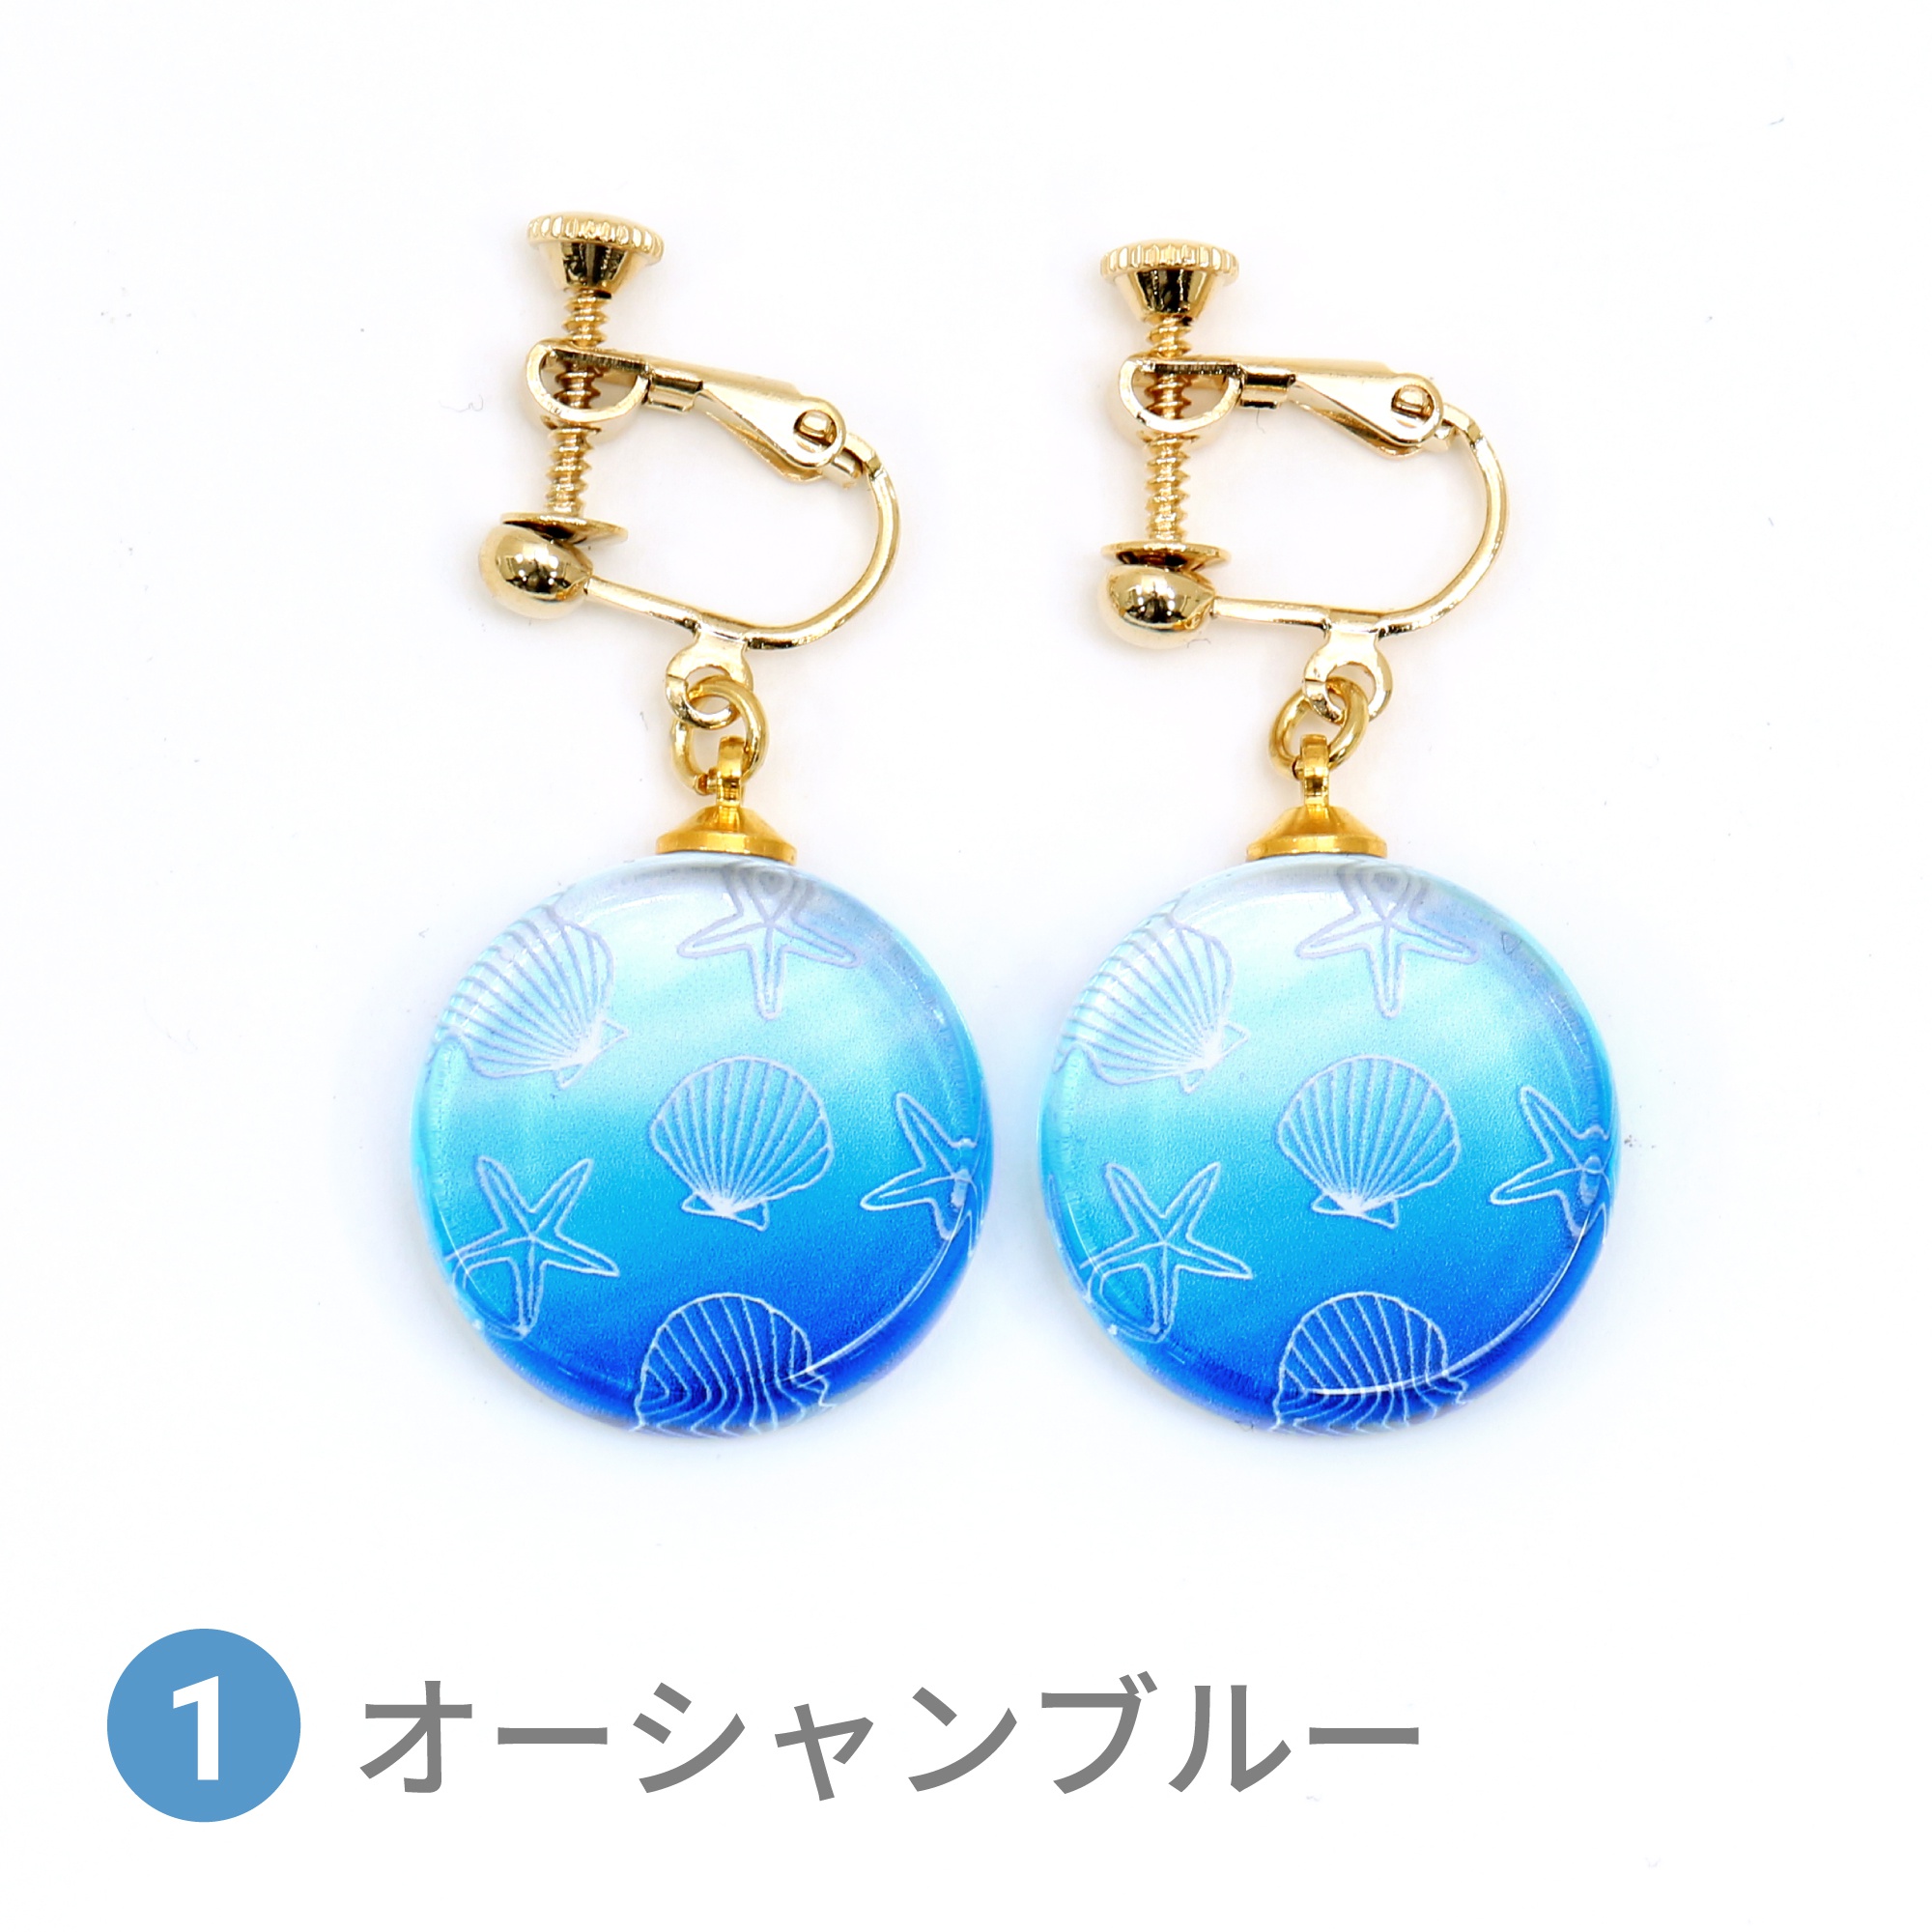 Glass accessories Earring SHELL oceanblue round shape